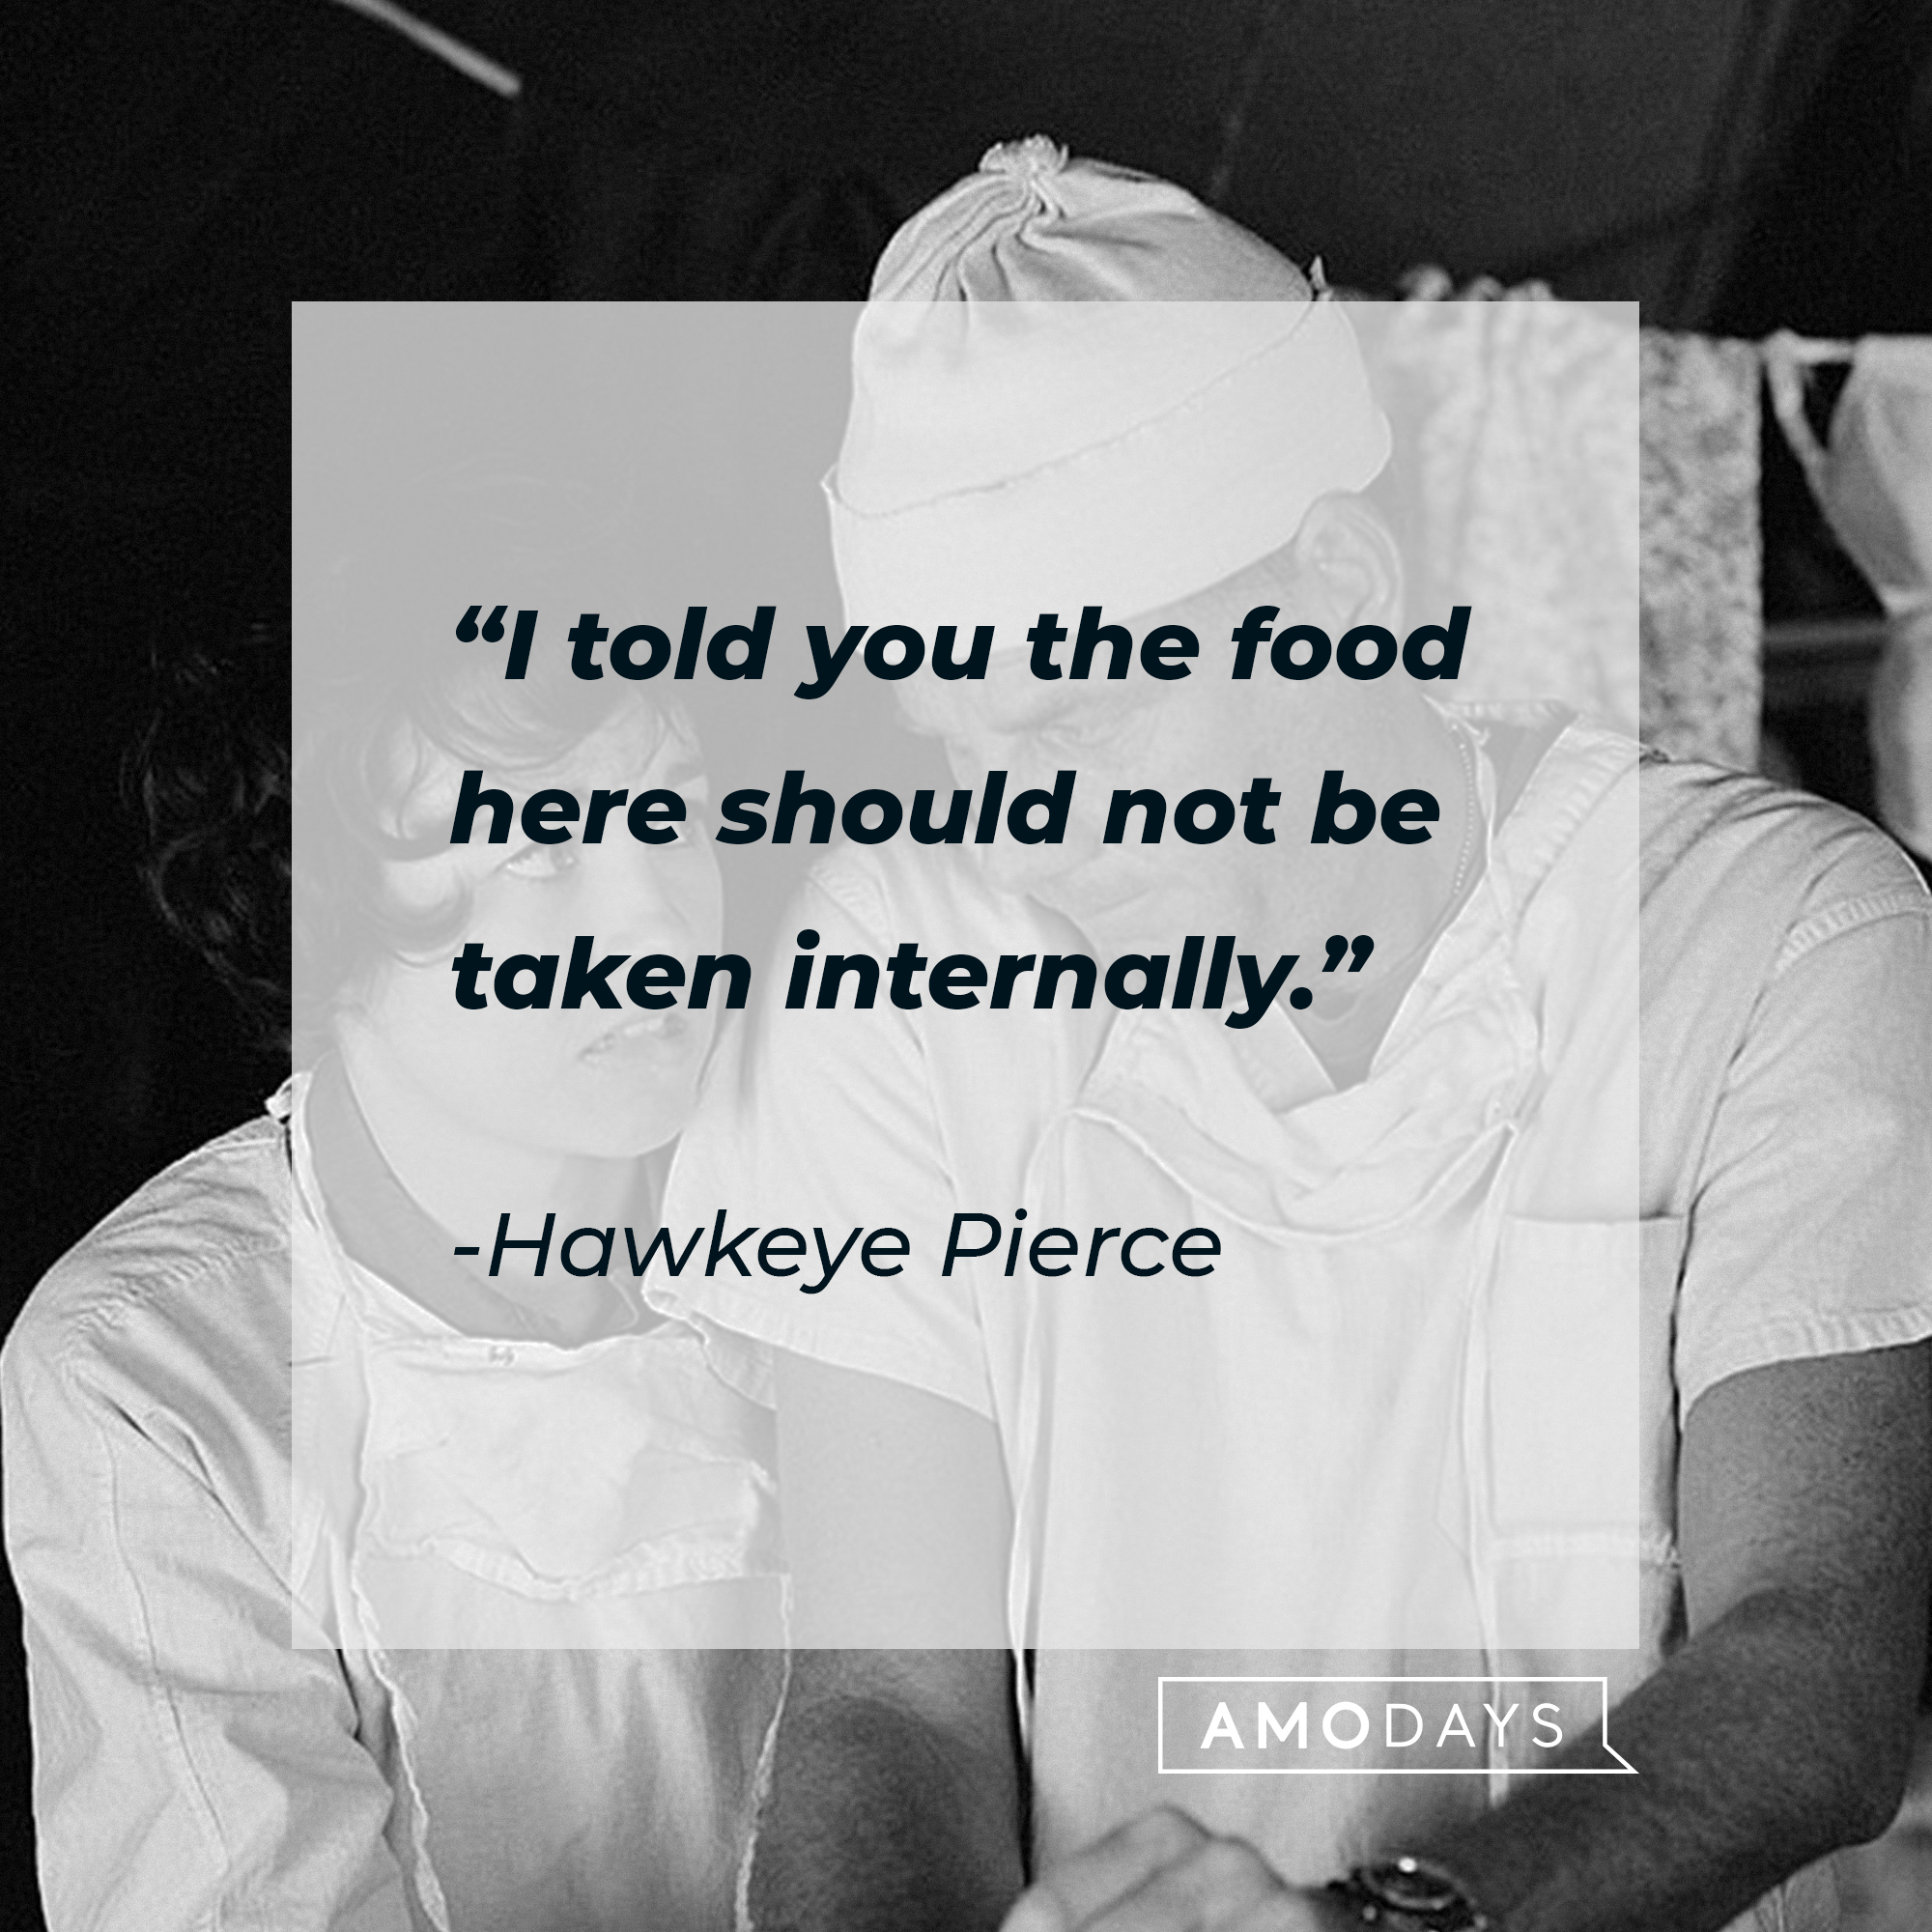 Hawkeye Pierce's quote: "I told you the food here should not be taken internally." | Source: Getty Images